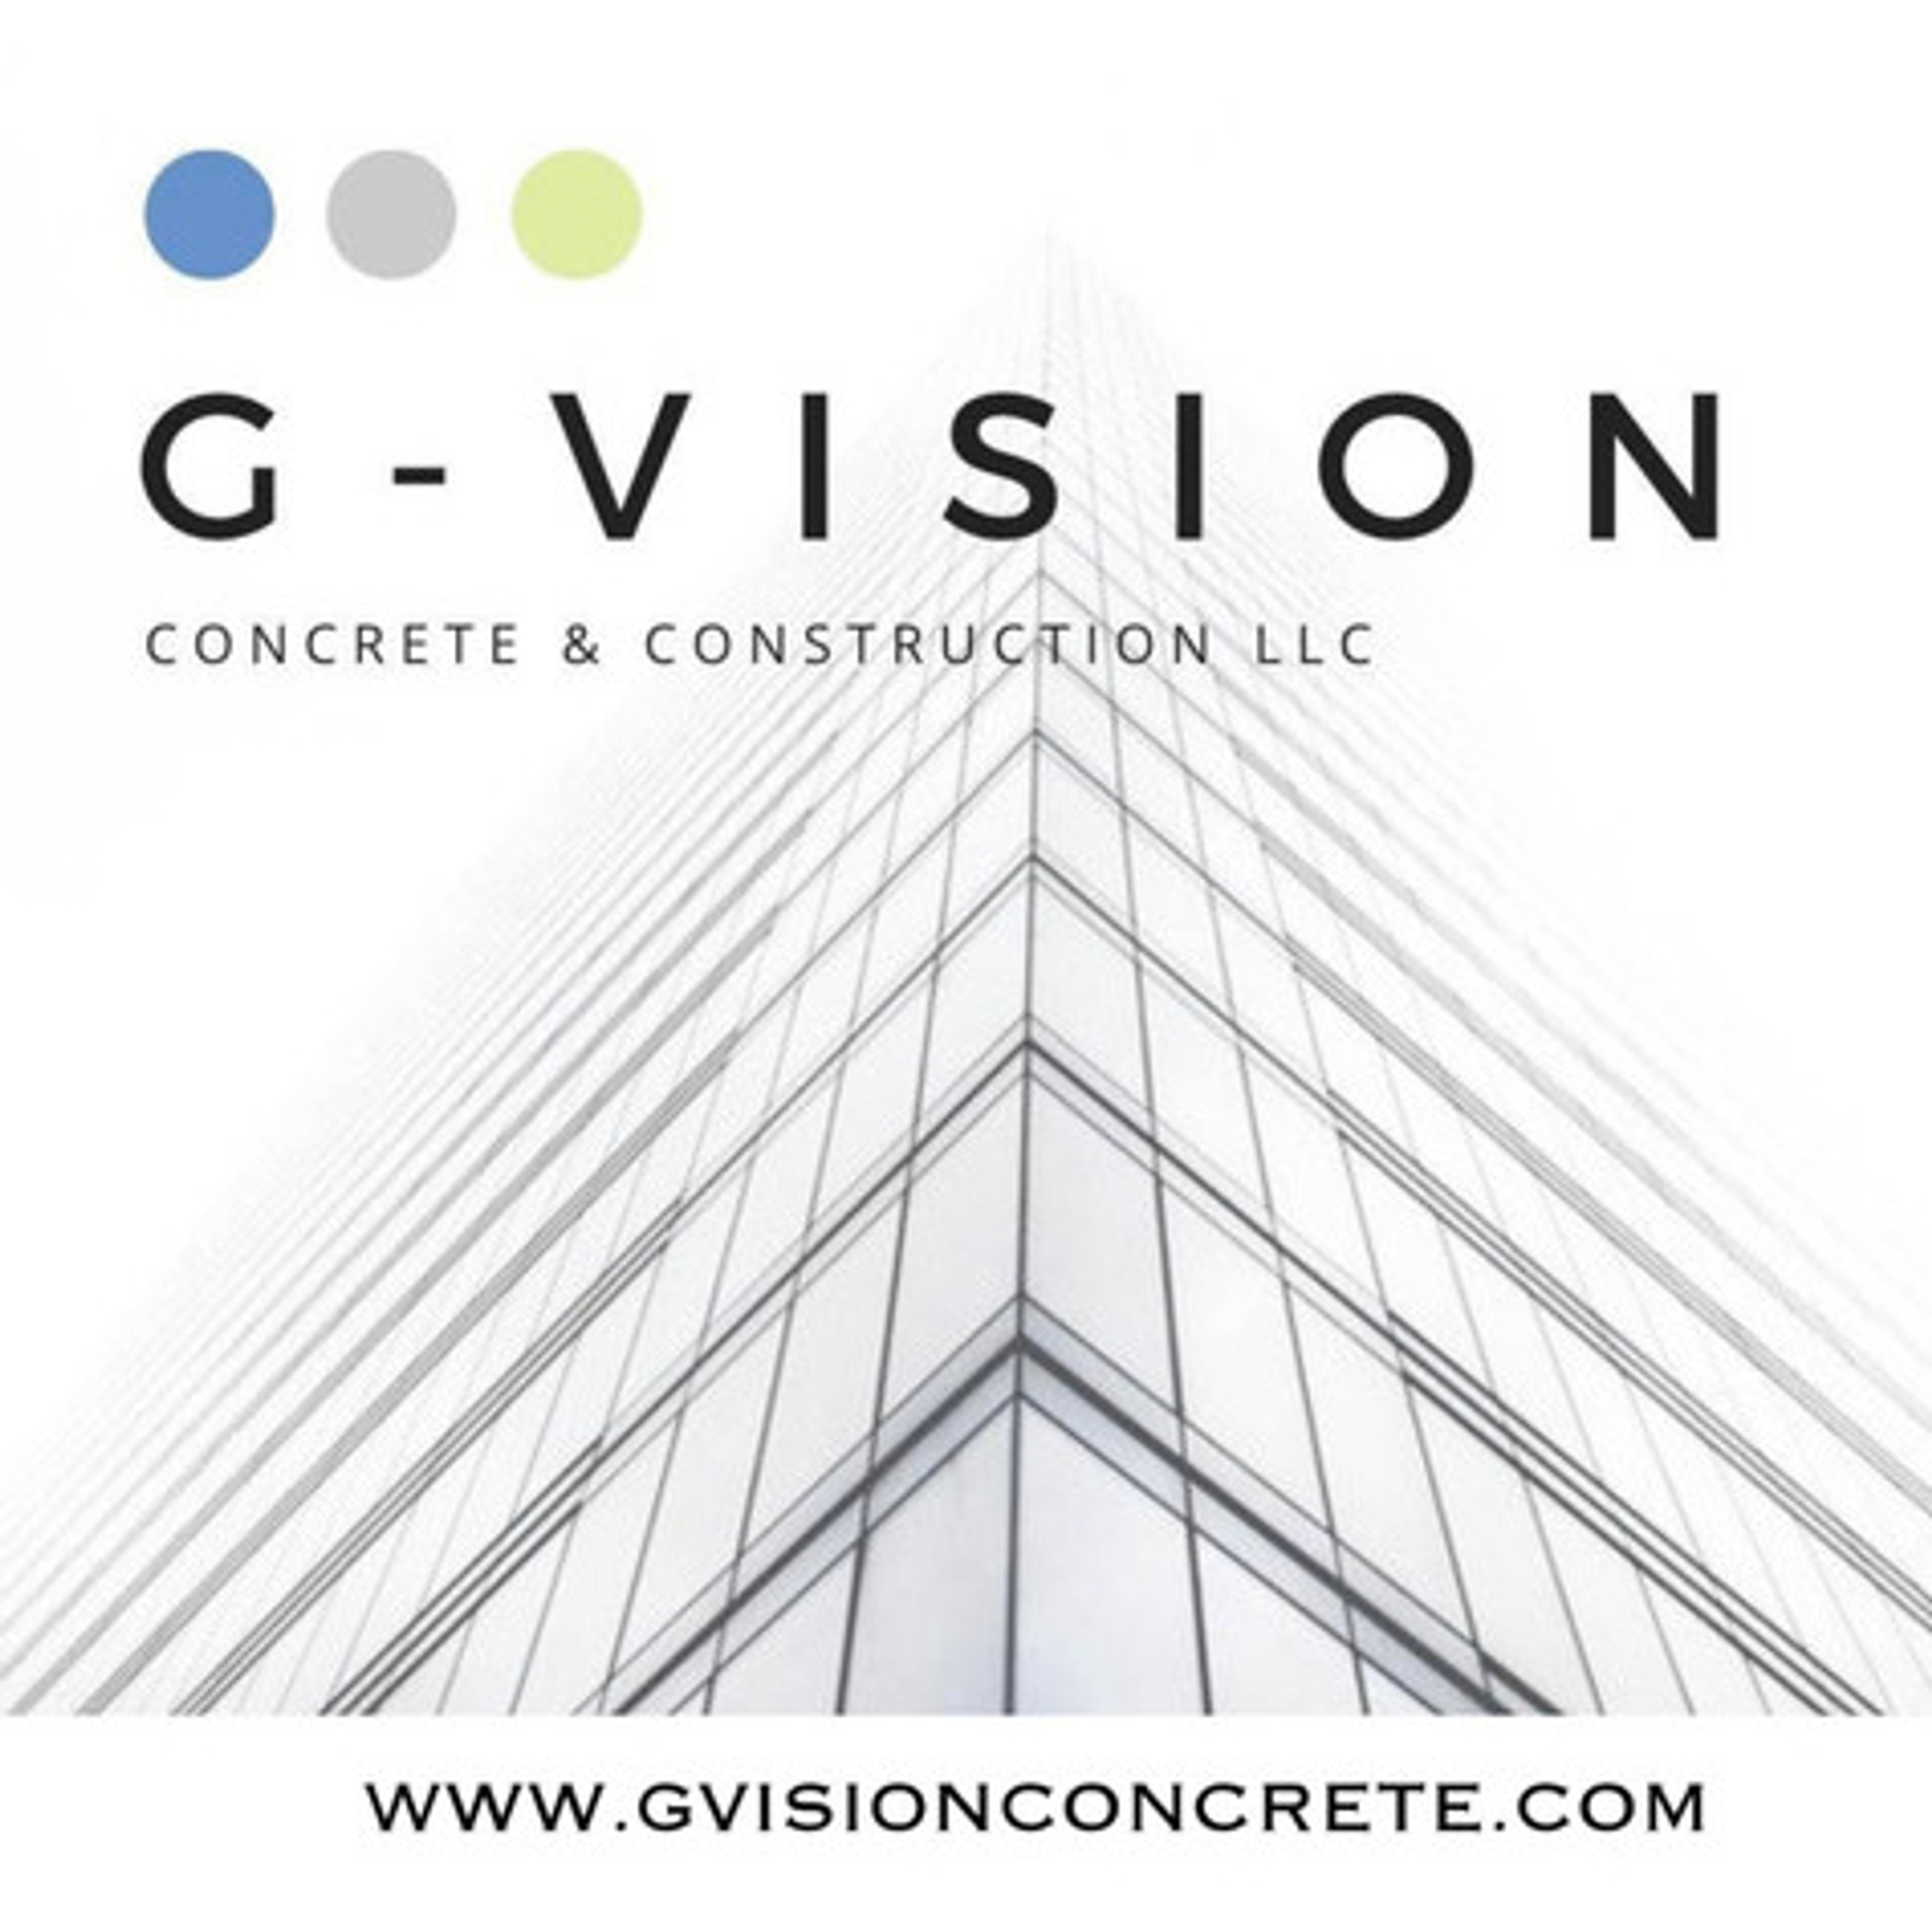 We are G-Vision Concrete & Construction LLC, a small and local businesses where we value your needs and our work. Reach out.